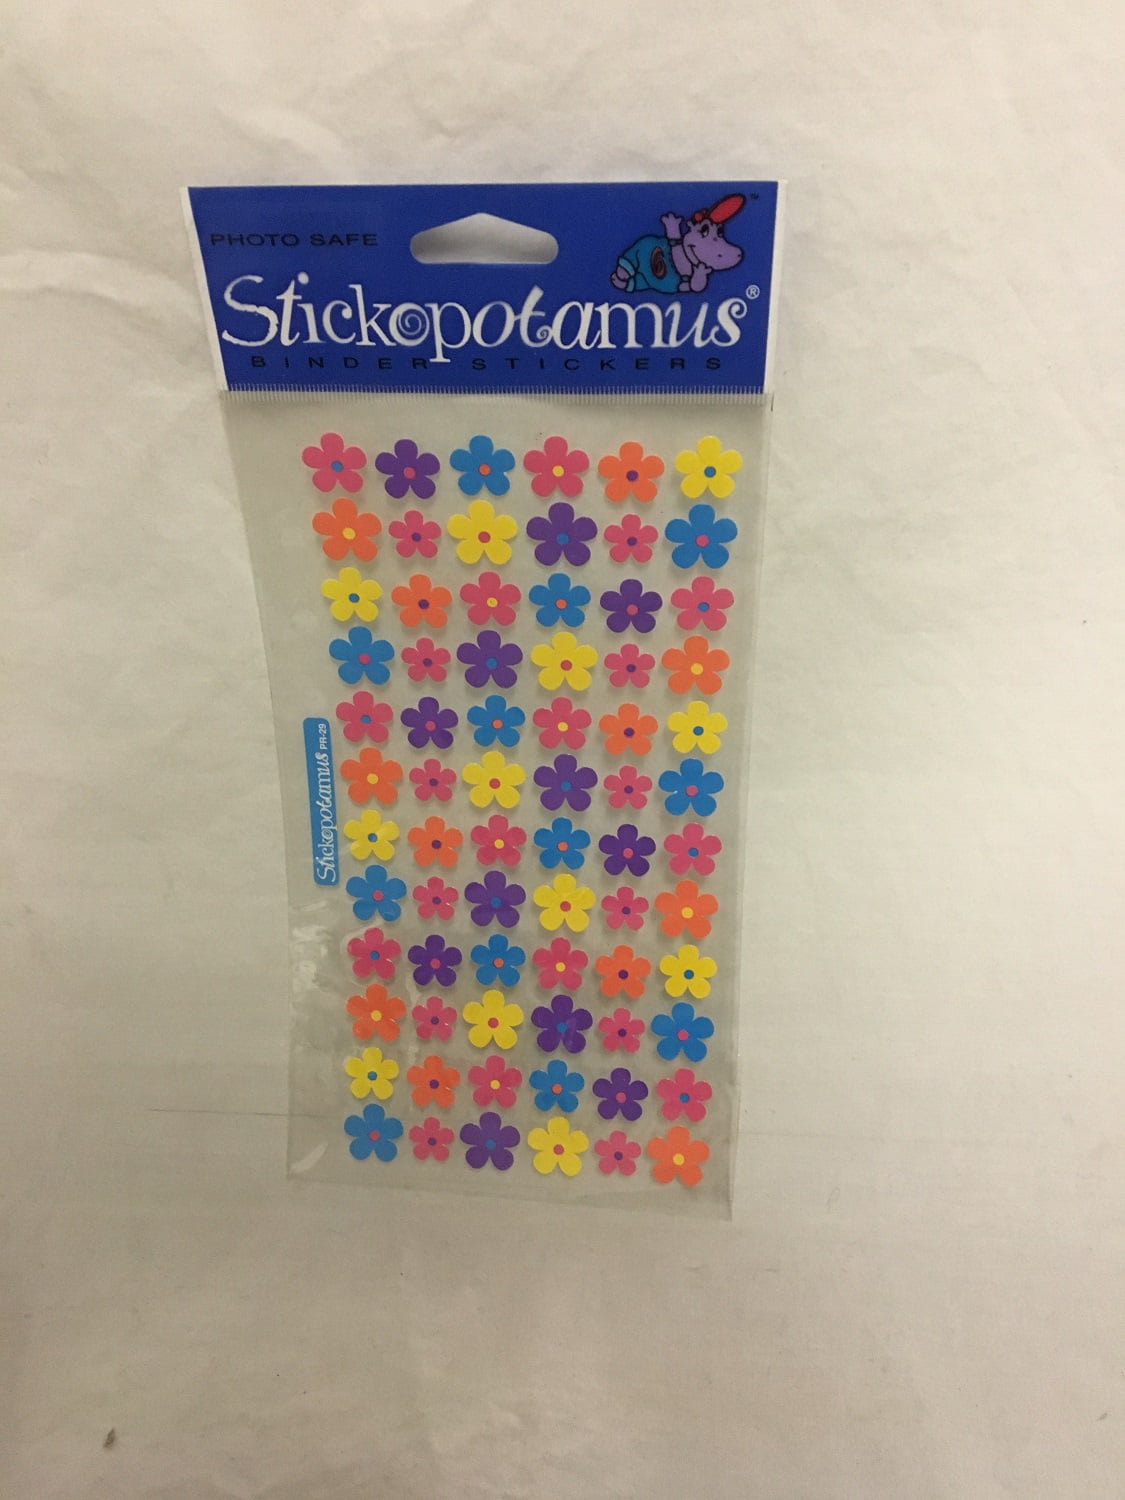 Hearts Tiny Stickers Brand New in Package Unopened Stickepotamus